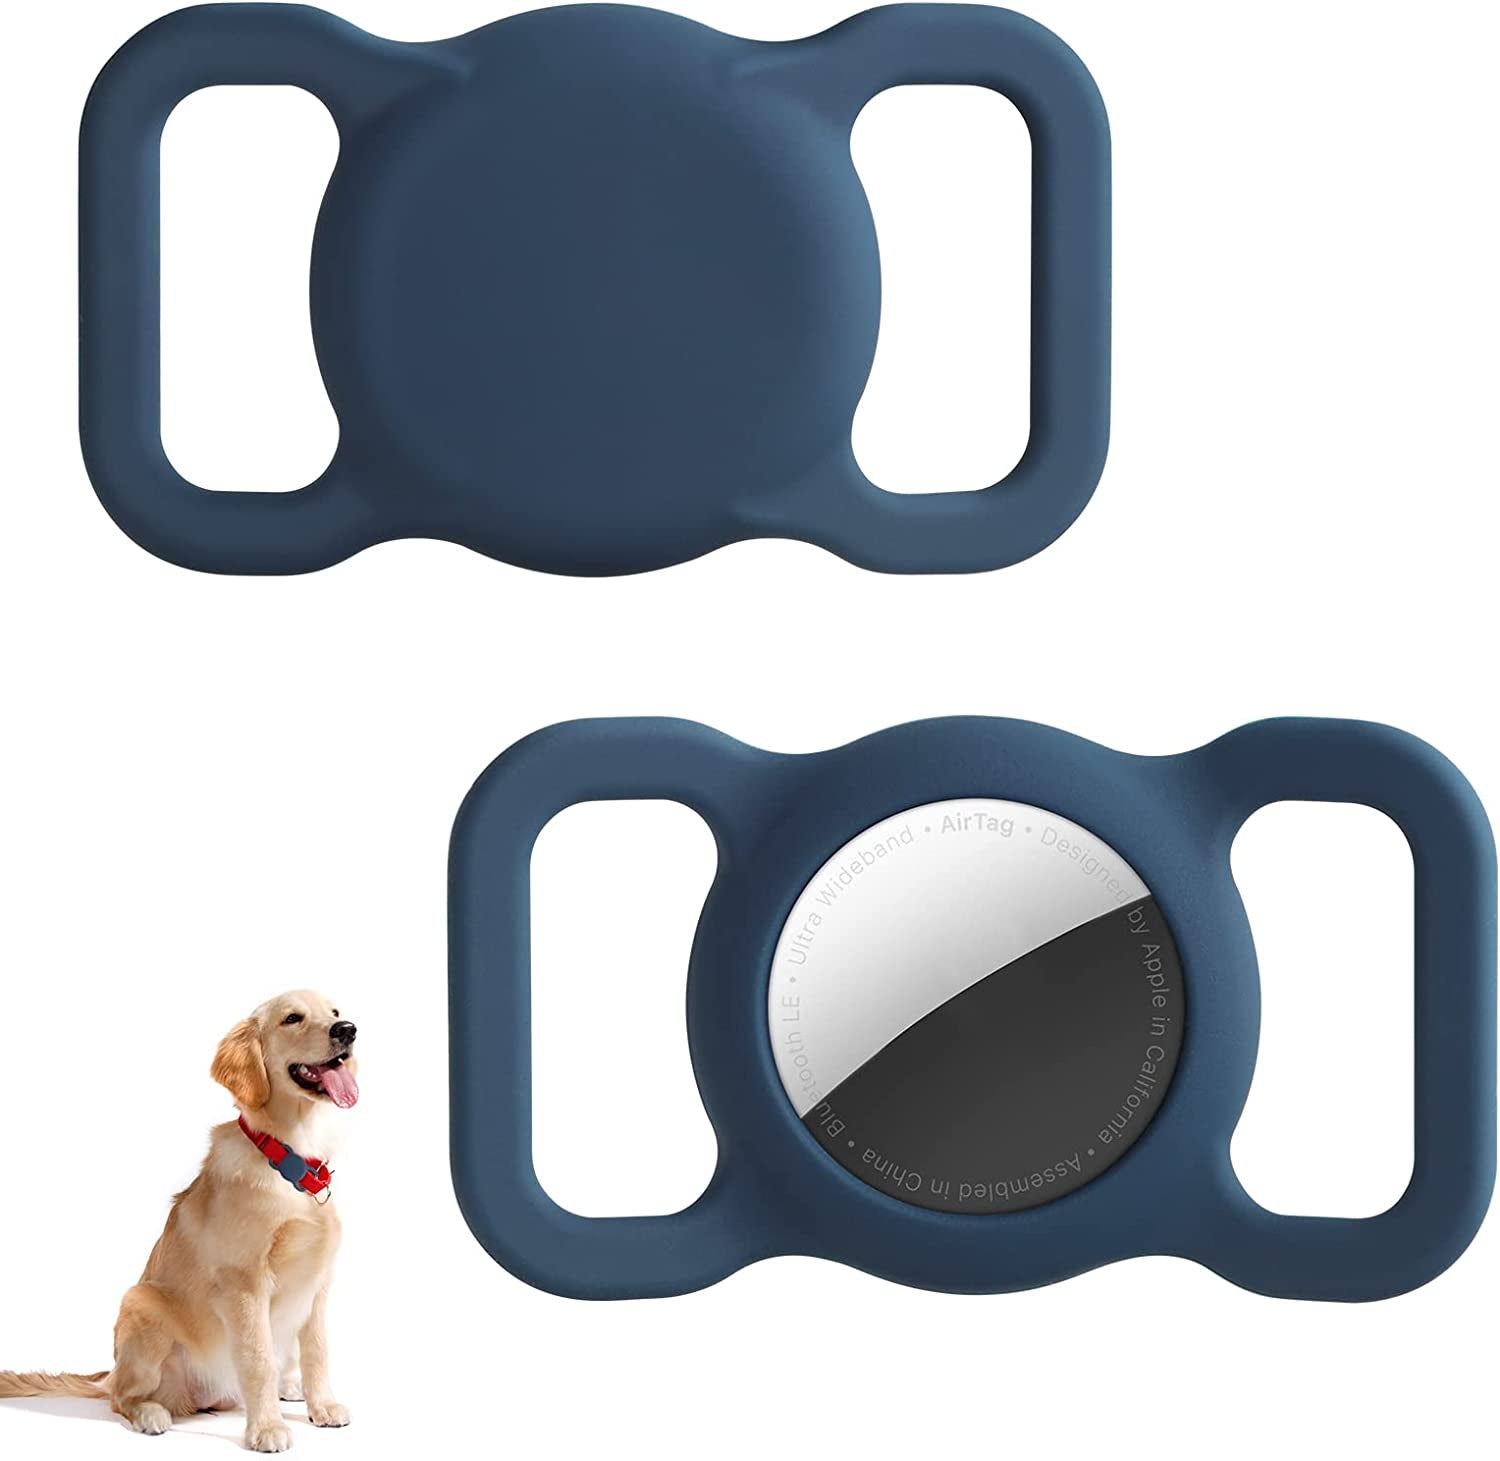 ELOVEN for Airtag Case for Dog Cat Collar Holder Compatible with Airtag Tracker Silicone Airtag Case Anti-Slip Shockproof anti Scratch Protective Cover for Airtag Pet Collar Loop Midnight Blue